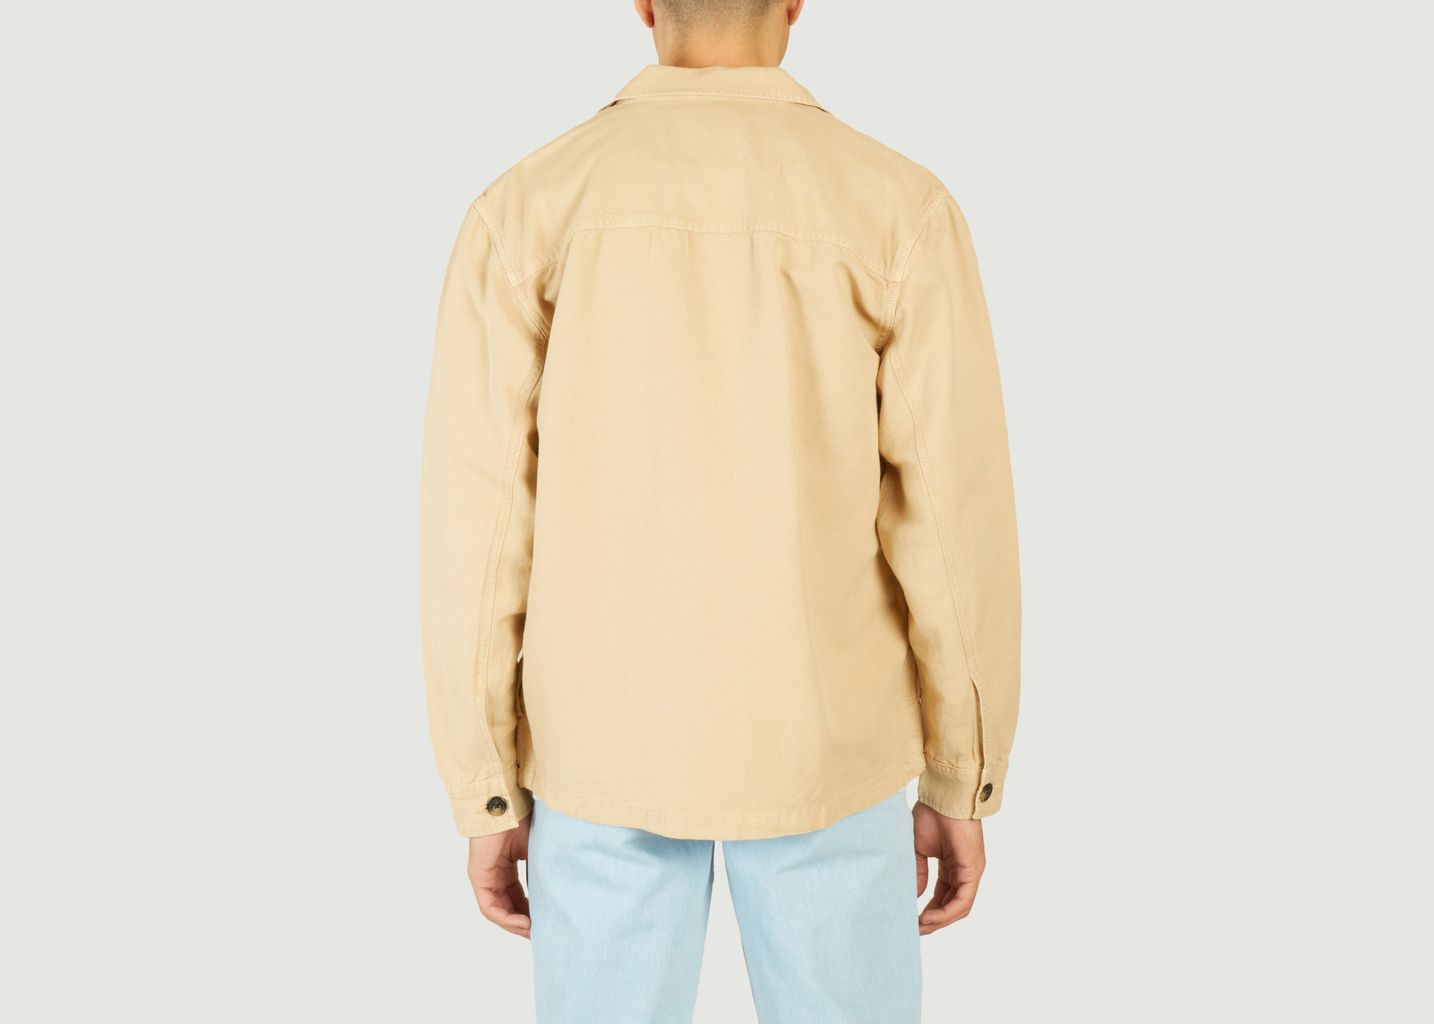 Plain overshirt in linen and cotton twill - Gant